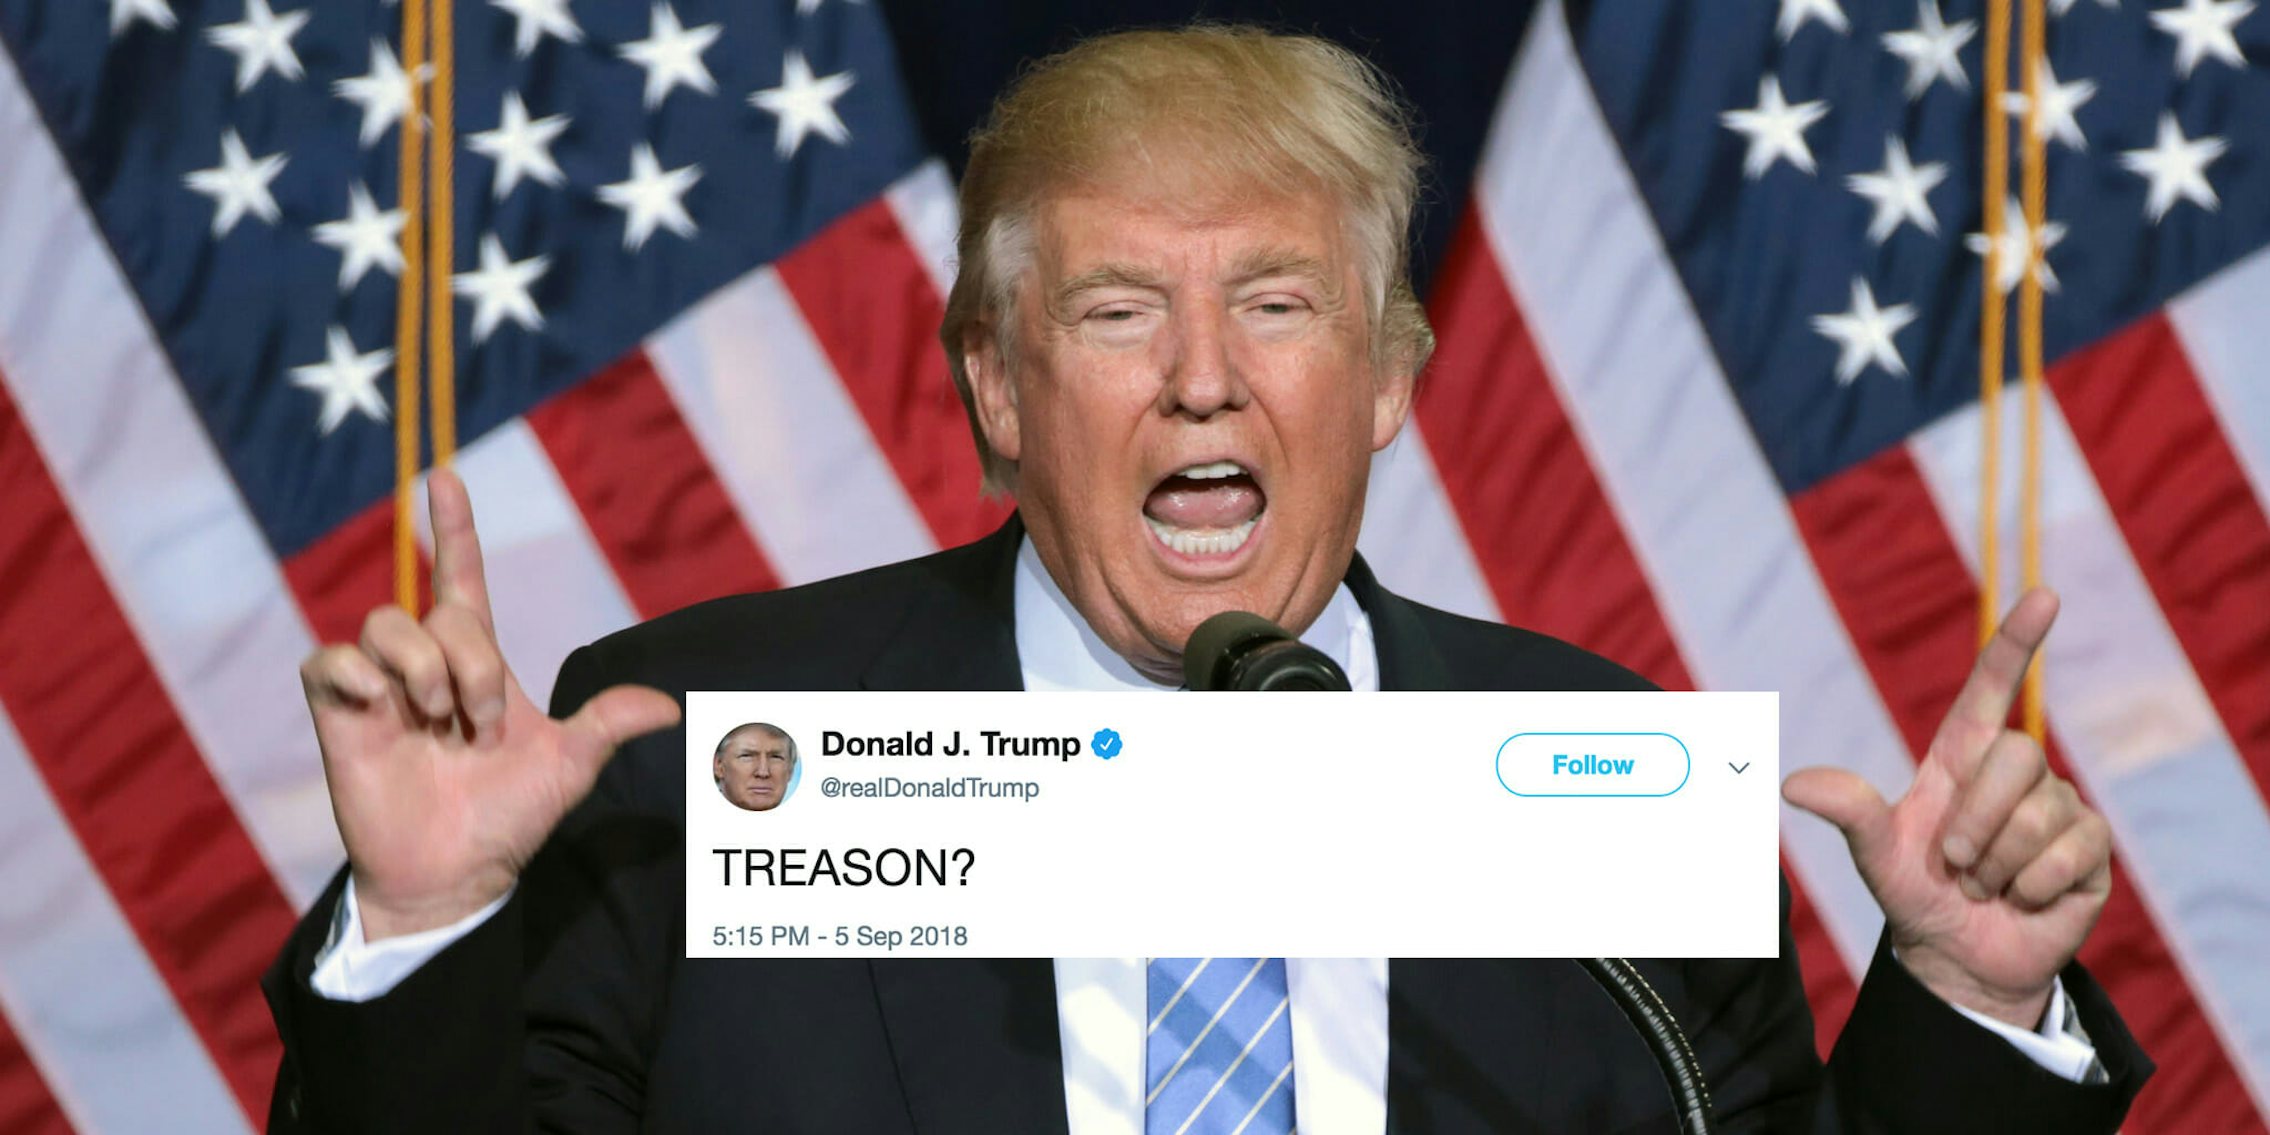 Twitter memes mock Trump for his 'TREASON?' tweet responding to the anonymous New York Times op-ed.